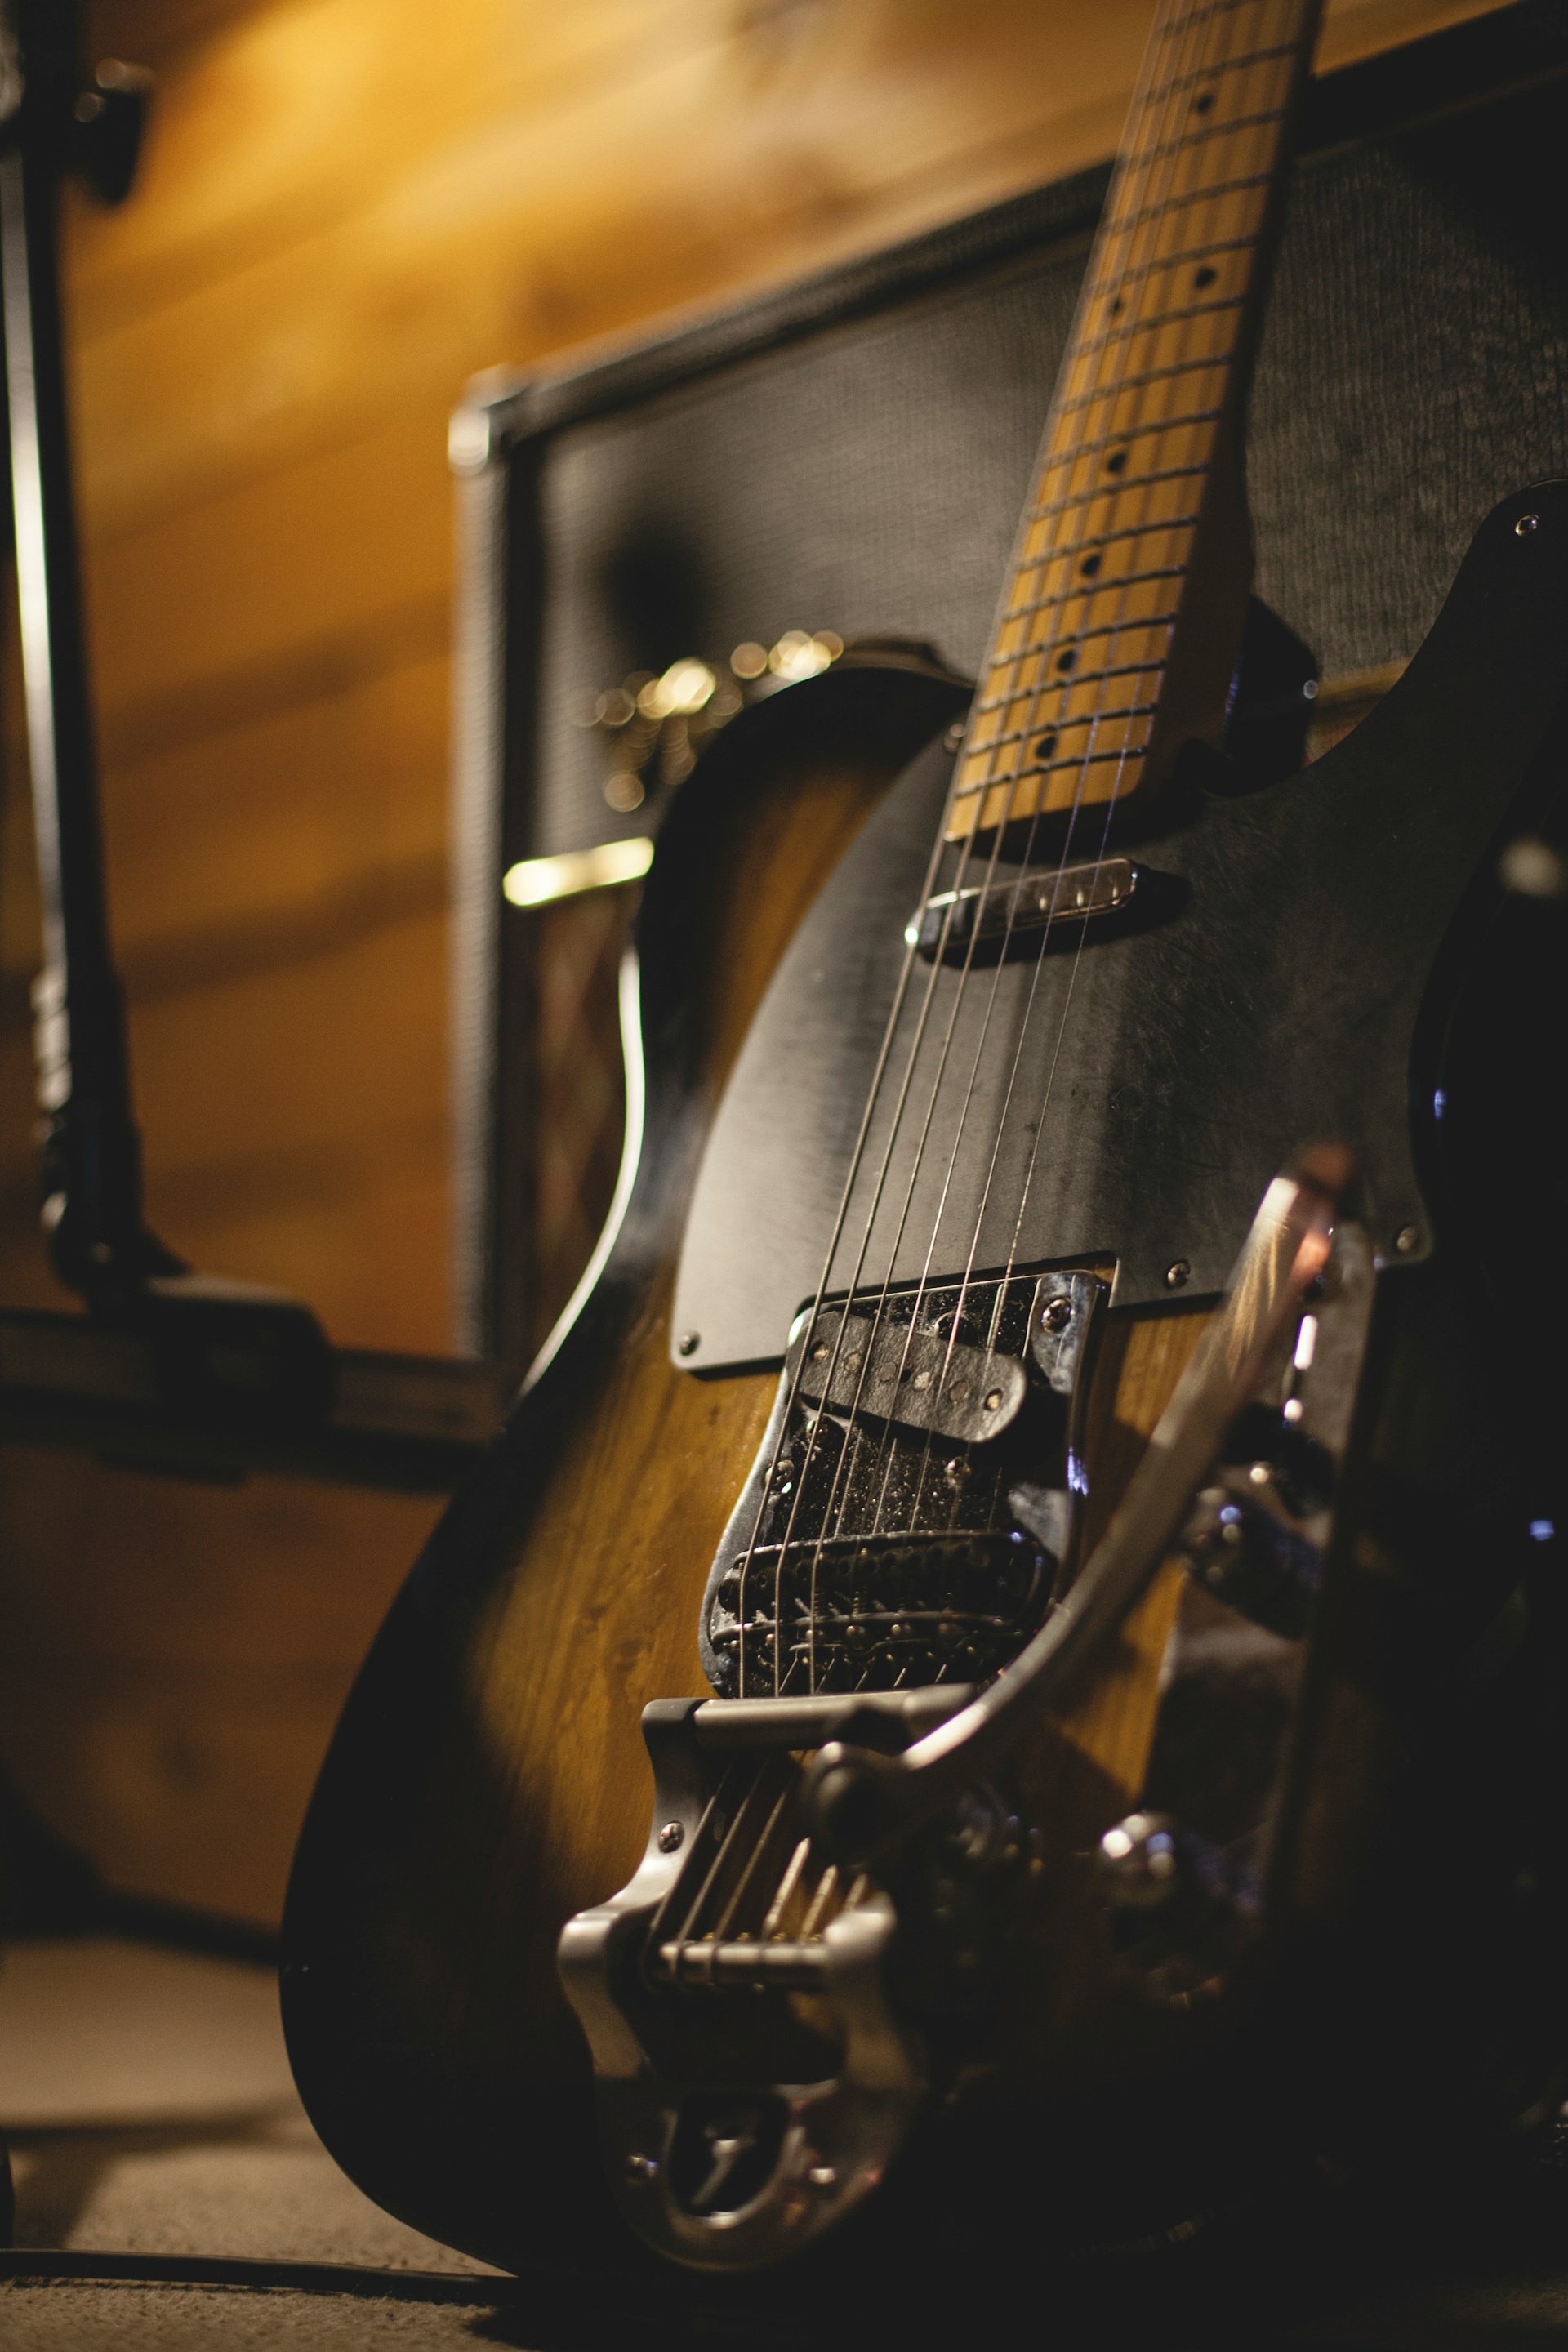 Guitar guide: Everything you need to know abut guitars and accessories